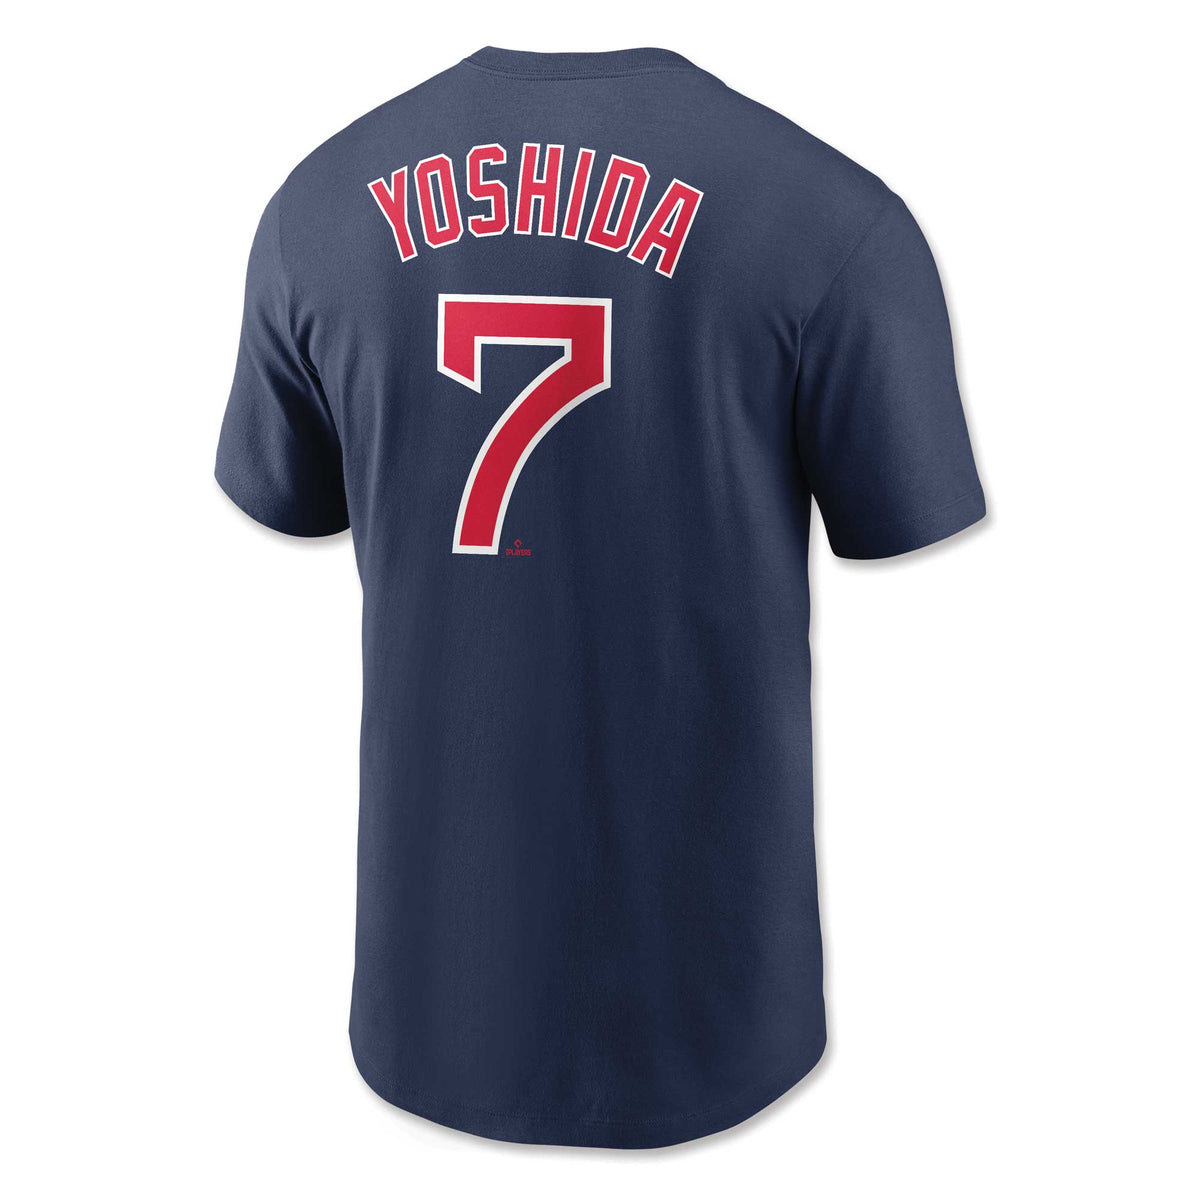 How is there is no Yoshida jersey for sale yet? We have a great hitter and  we cannot rep his jersey! : r/redsox